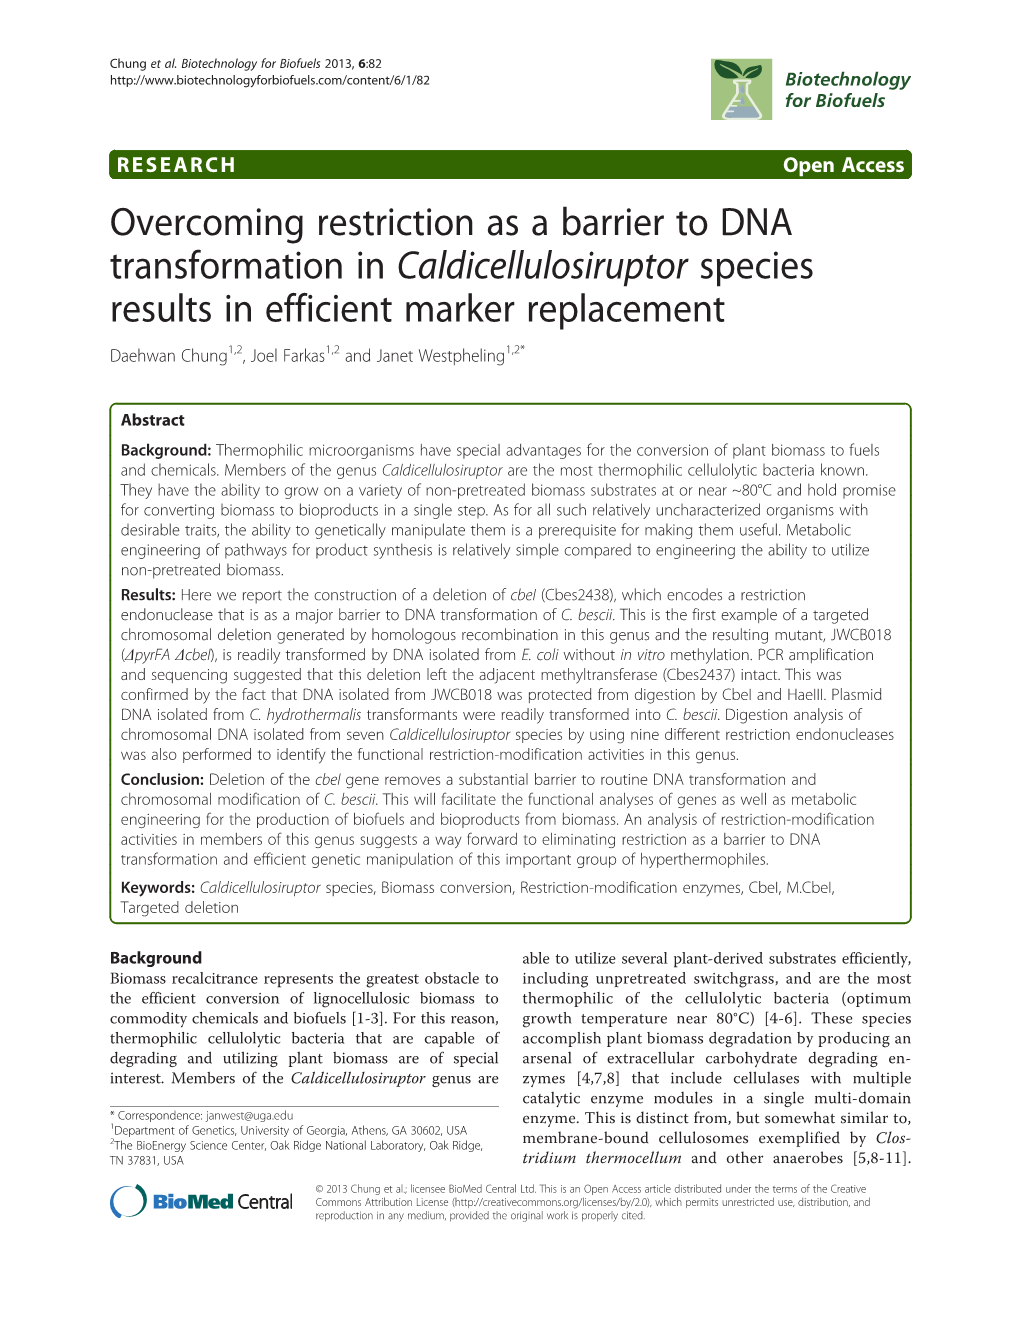 Overcoming Restriction As a Barrier to DNA Transformation In